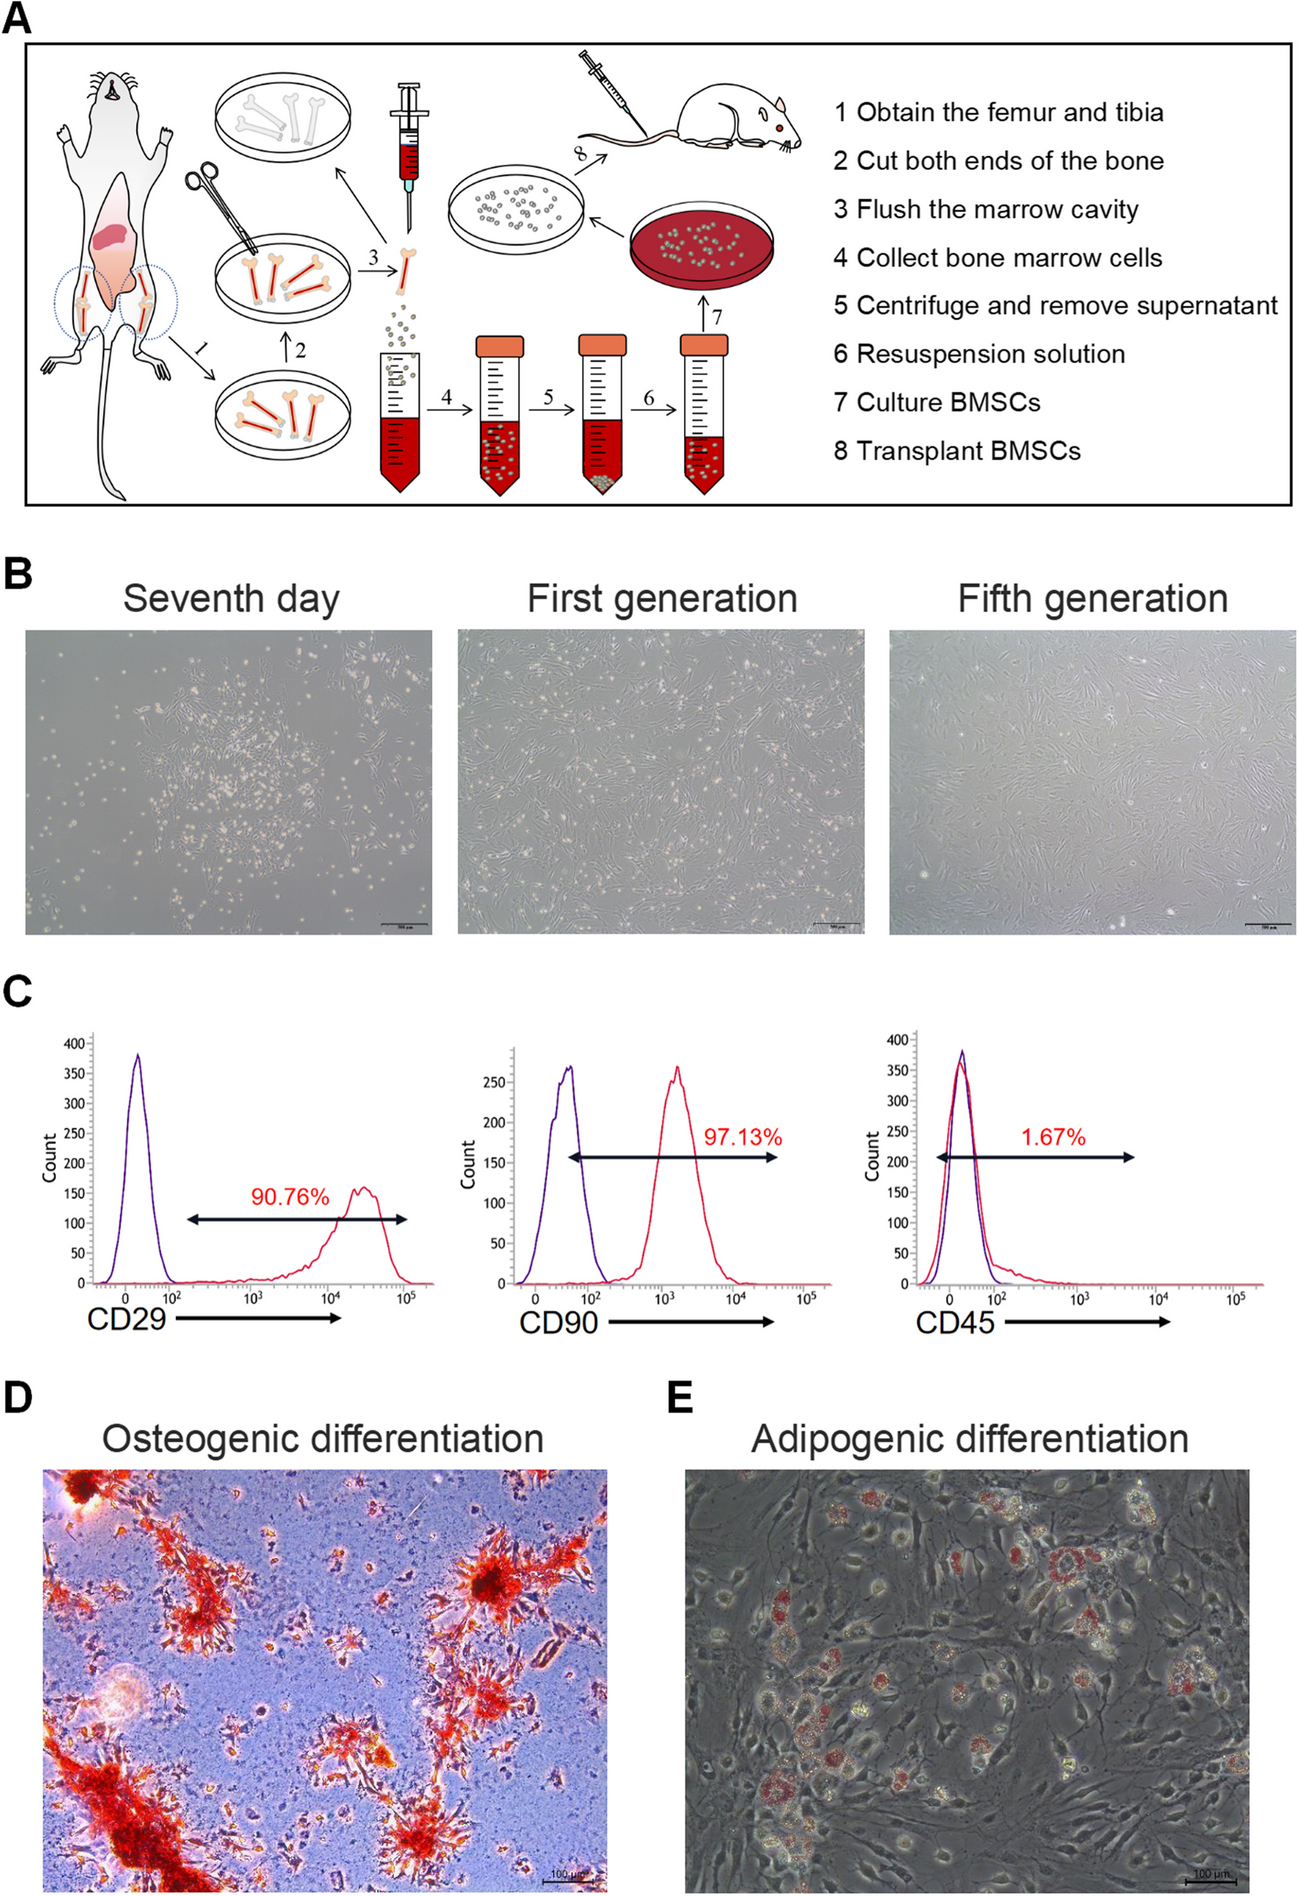 Combination Therapy of Bone Marrow Mesenchymal Stem Cell Transplantation and Electroacupuncture for the Repair of Intrauterine Adhesions in Rats: Mechanisms and Functional Recovery